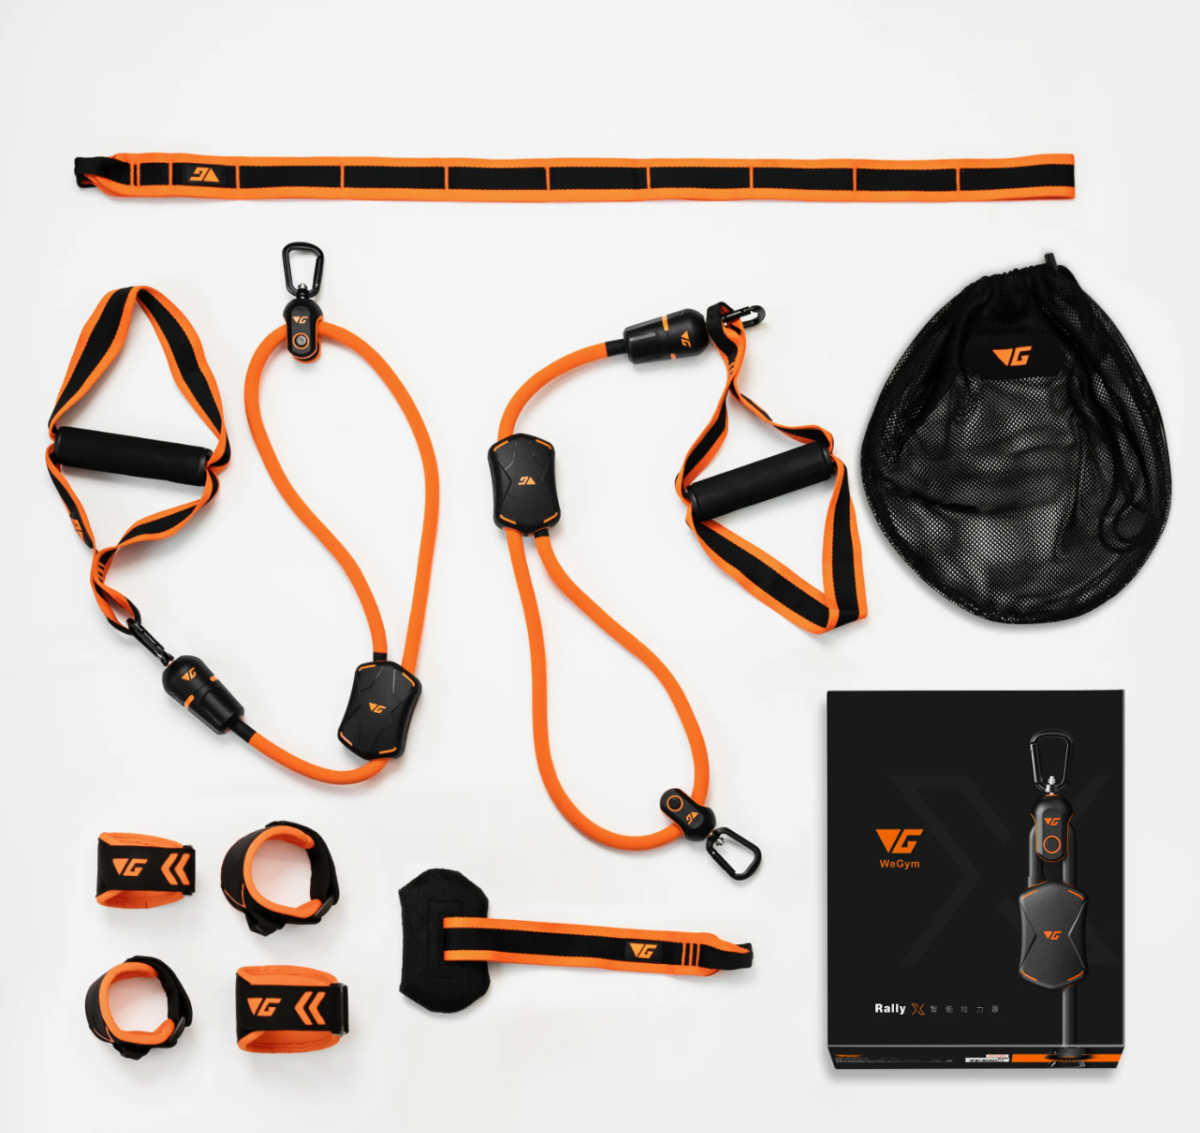 Use the portable WeGym Gym System, when you want to be able to keep up with your workout goals at home or when you are away from home.  